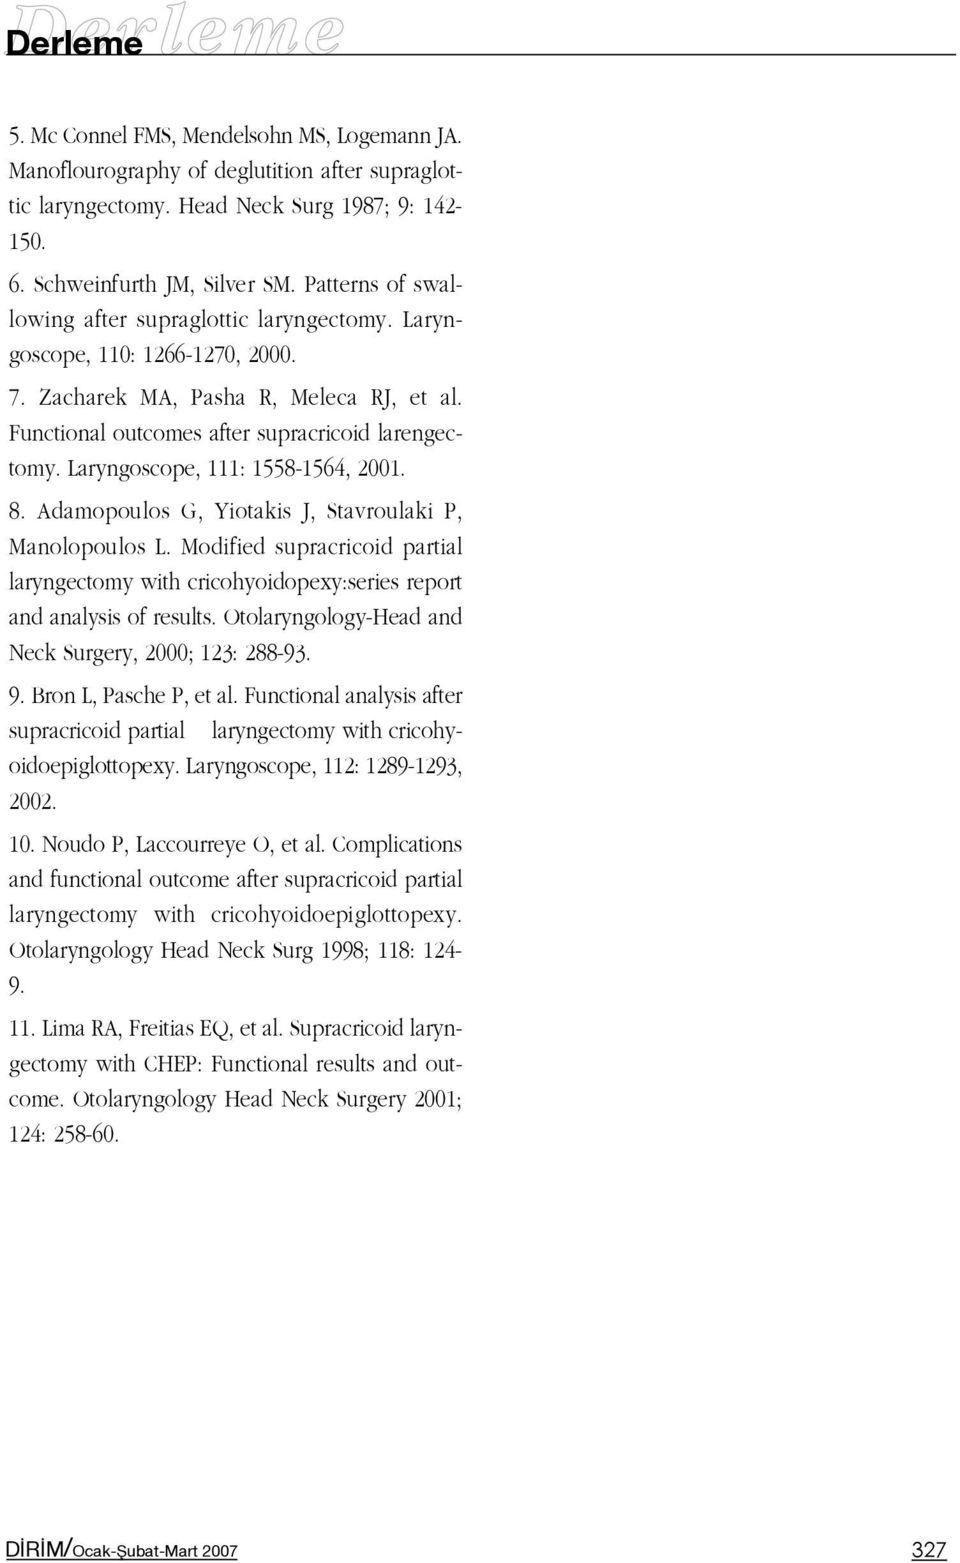 Laryngoscope, 111: 1558-1564, 2001. 8. Adamopoulos G, Yiotakis J, Stavroulaki P, Manolopoulos L. Modified supracricoid partial laryngectomy with cricohyoidopexy:series report and analysis of results.